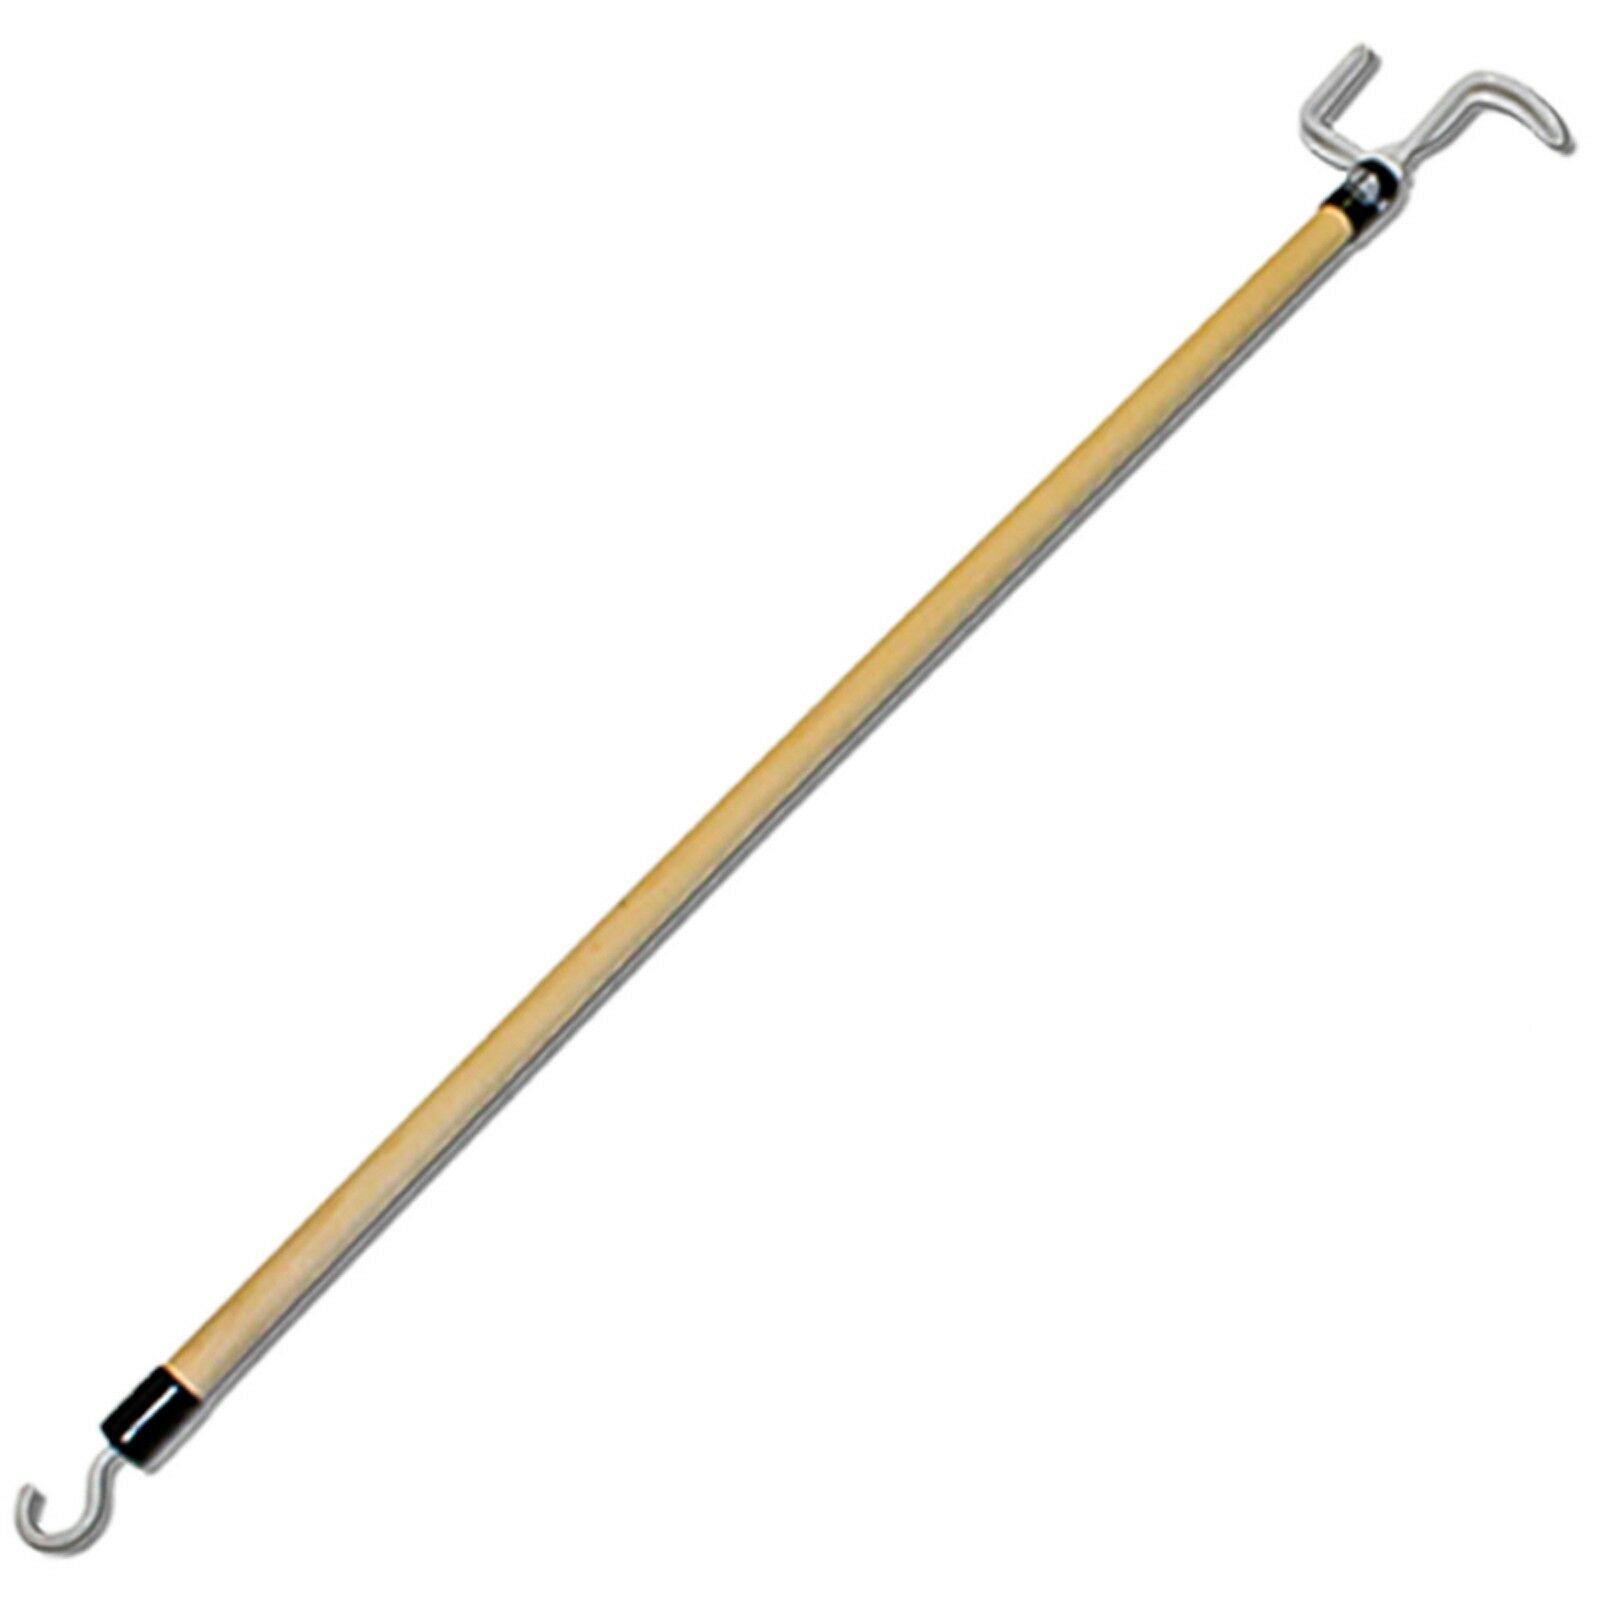 Rms 28" Long Dressing Stick Aid W Zipper Puller And Sock Or Stocking Remover